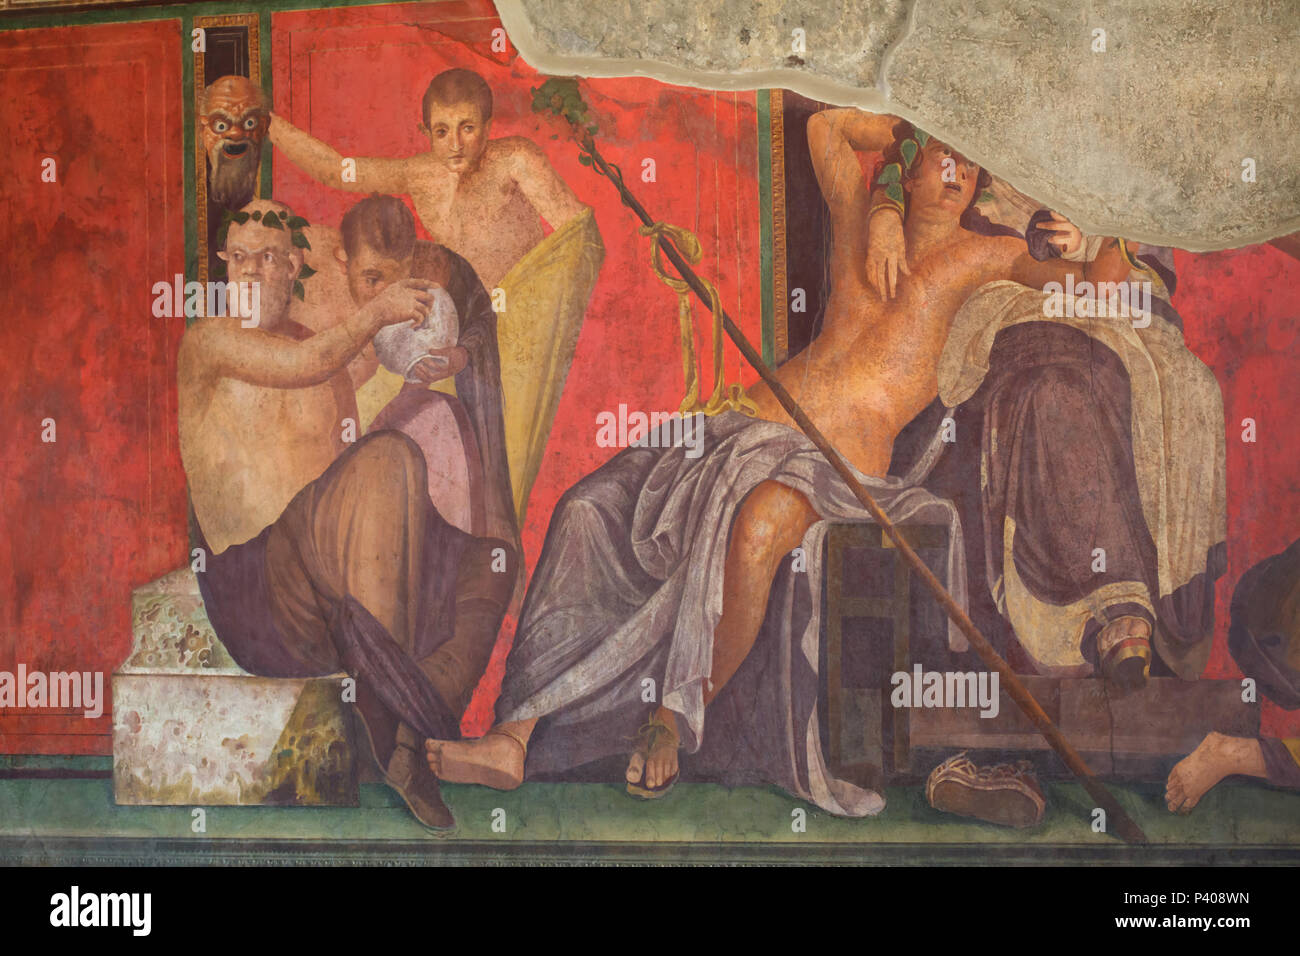 Dionysian Mysteries (Bacchian Mysteries) depicted in the Roman fresco in the triclinium (Roman dining room) in the Villa of the Mysteries (Villa dei Misteri) in the archaeological site of Pompeii (Pompei) near Naples, Campania, Italy. Initiation rite from the mysterious cult of Dionysus (Bacchus) is probably depicted in the murals. This fresco shows a young satyr being offered a bowl of wine by Silenus while behind him, another satyr holds up a frightening mask which the drinking satyr sees reflected in the bowl. Next to them sits a goddess (Ariadne or Semele), with Dionysus (Bacchus) lying ac Stock Photo